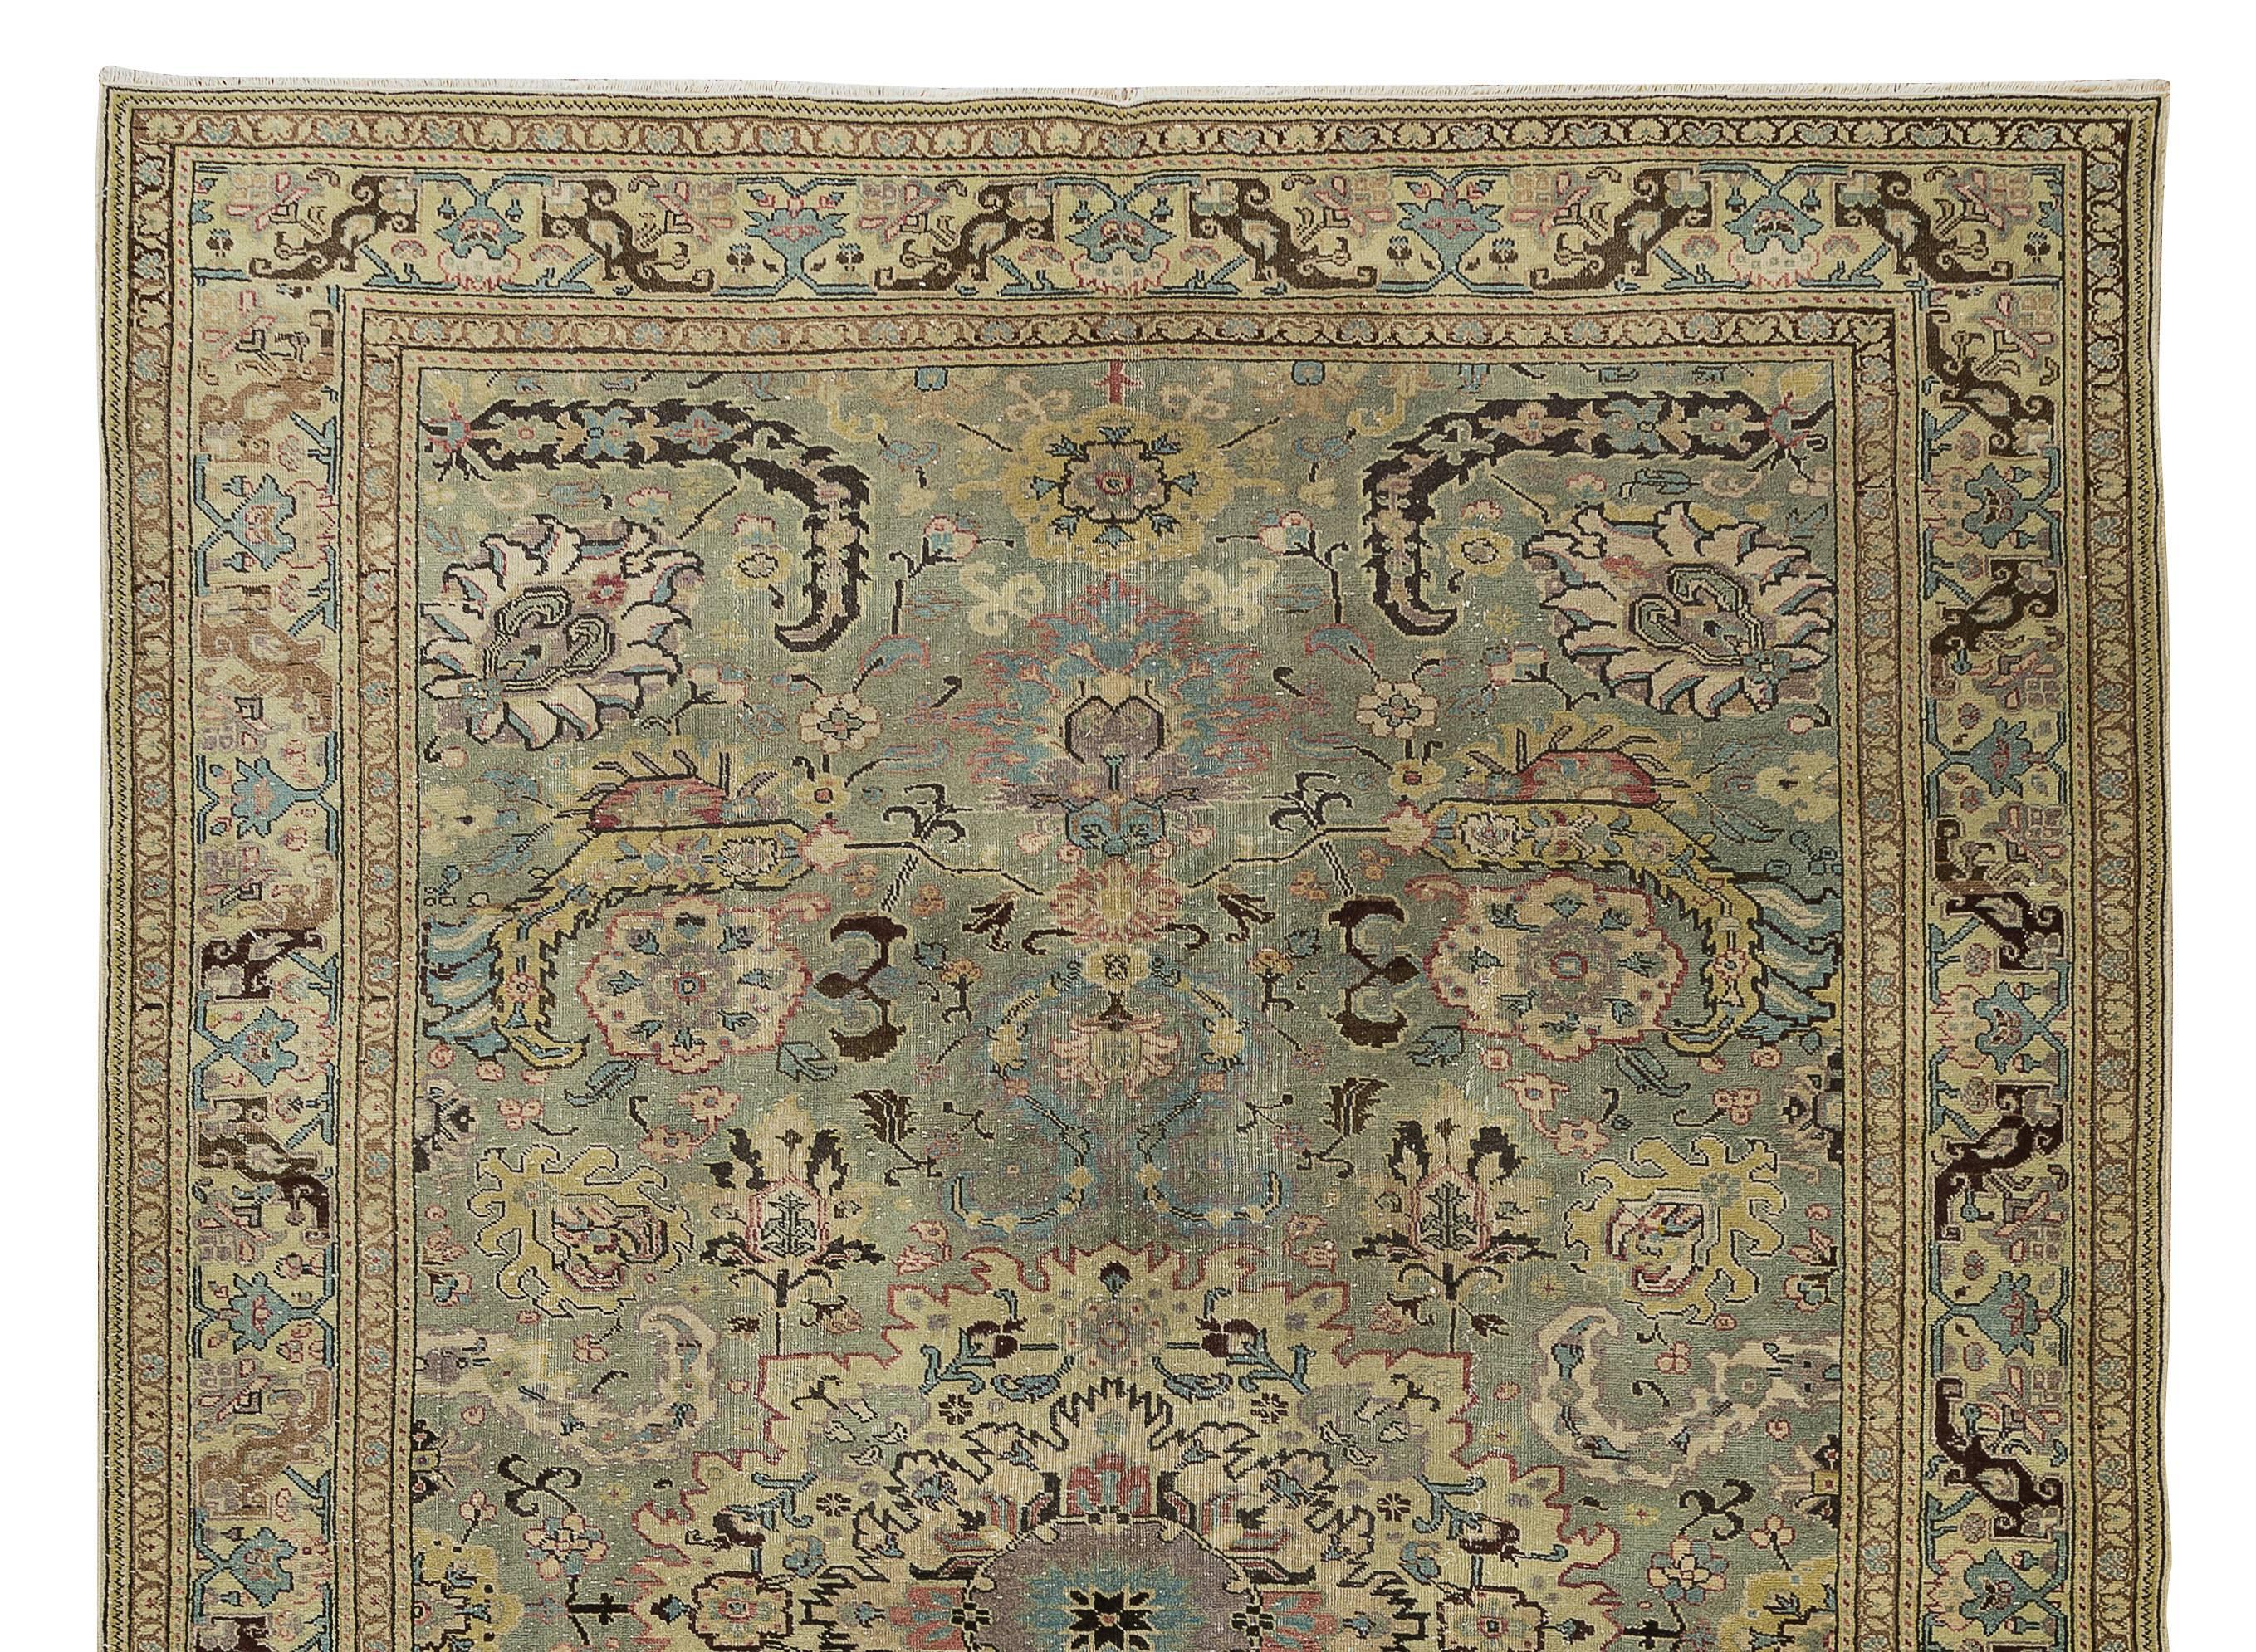 Hand-Knotted 6.5x9.6 Ft Vintage Handmade Anatolian Oushak Wool Area Rug in Shades of Green For Sale